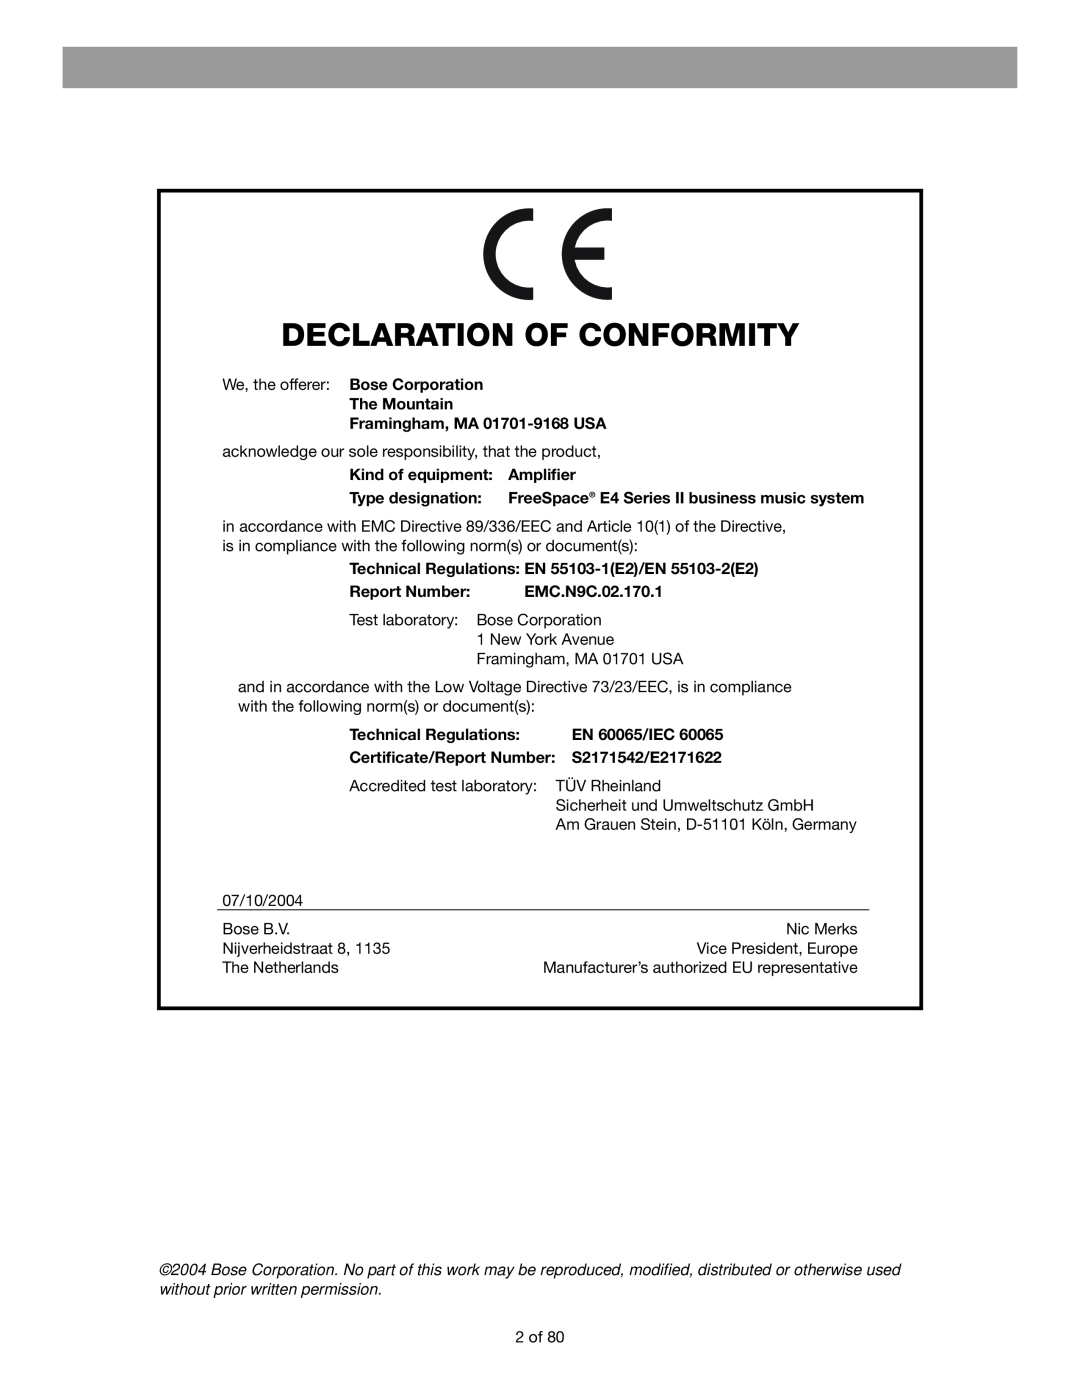 Bose E4 Declaration Of Conformity, The Mountain Framingham, MA 01701-9168USA, Kind of equipment Amplifier, Report Number 